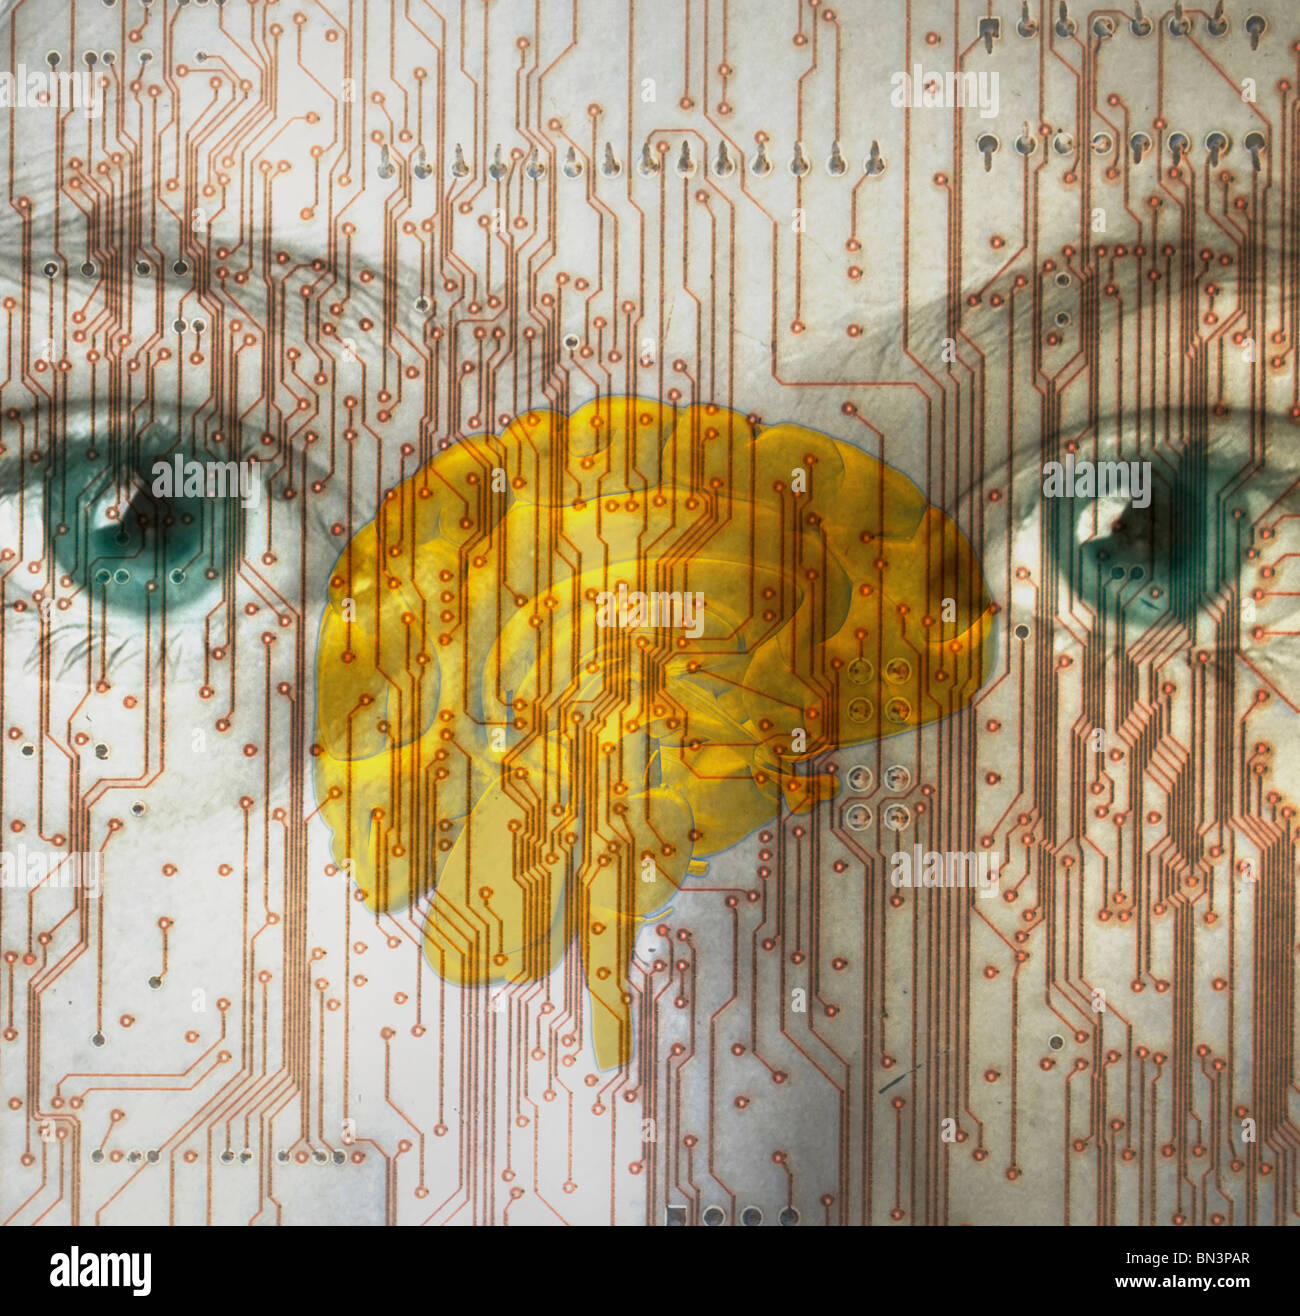 computer circuit board and the human brain superimposed over a photograph of a girl Stock Photo